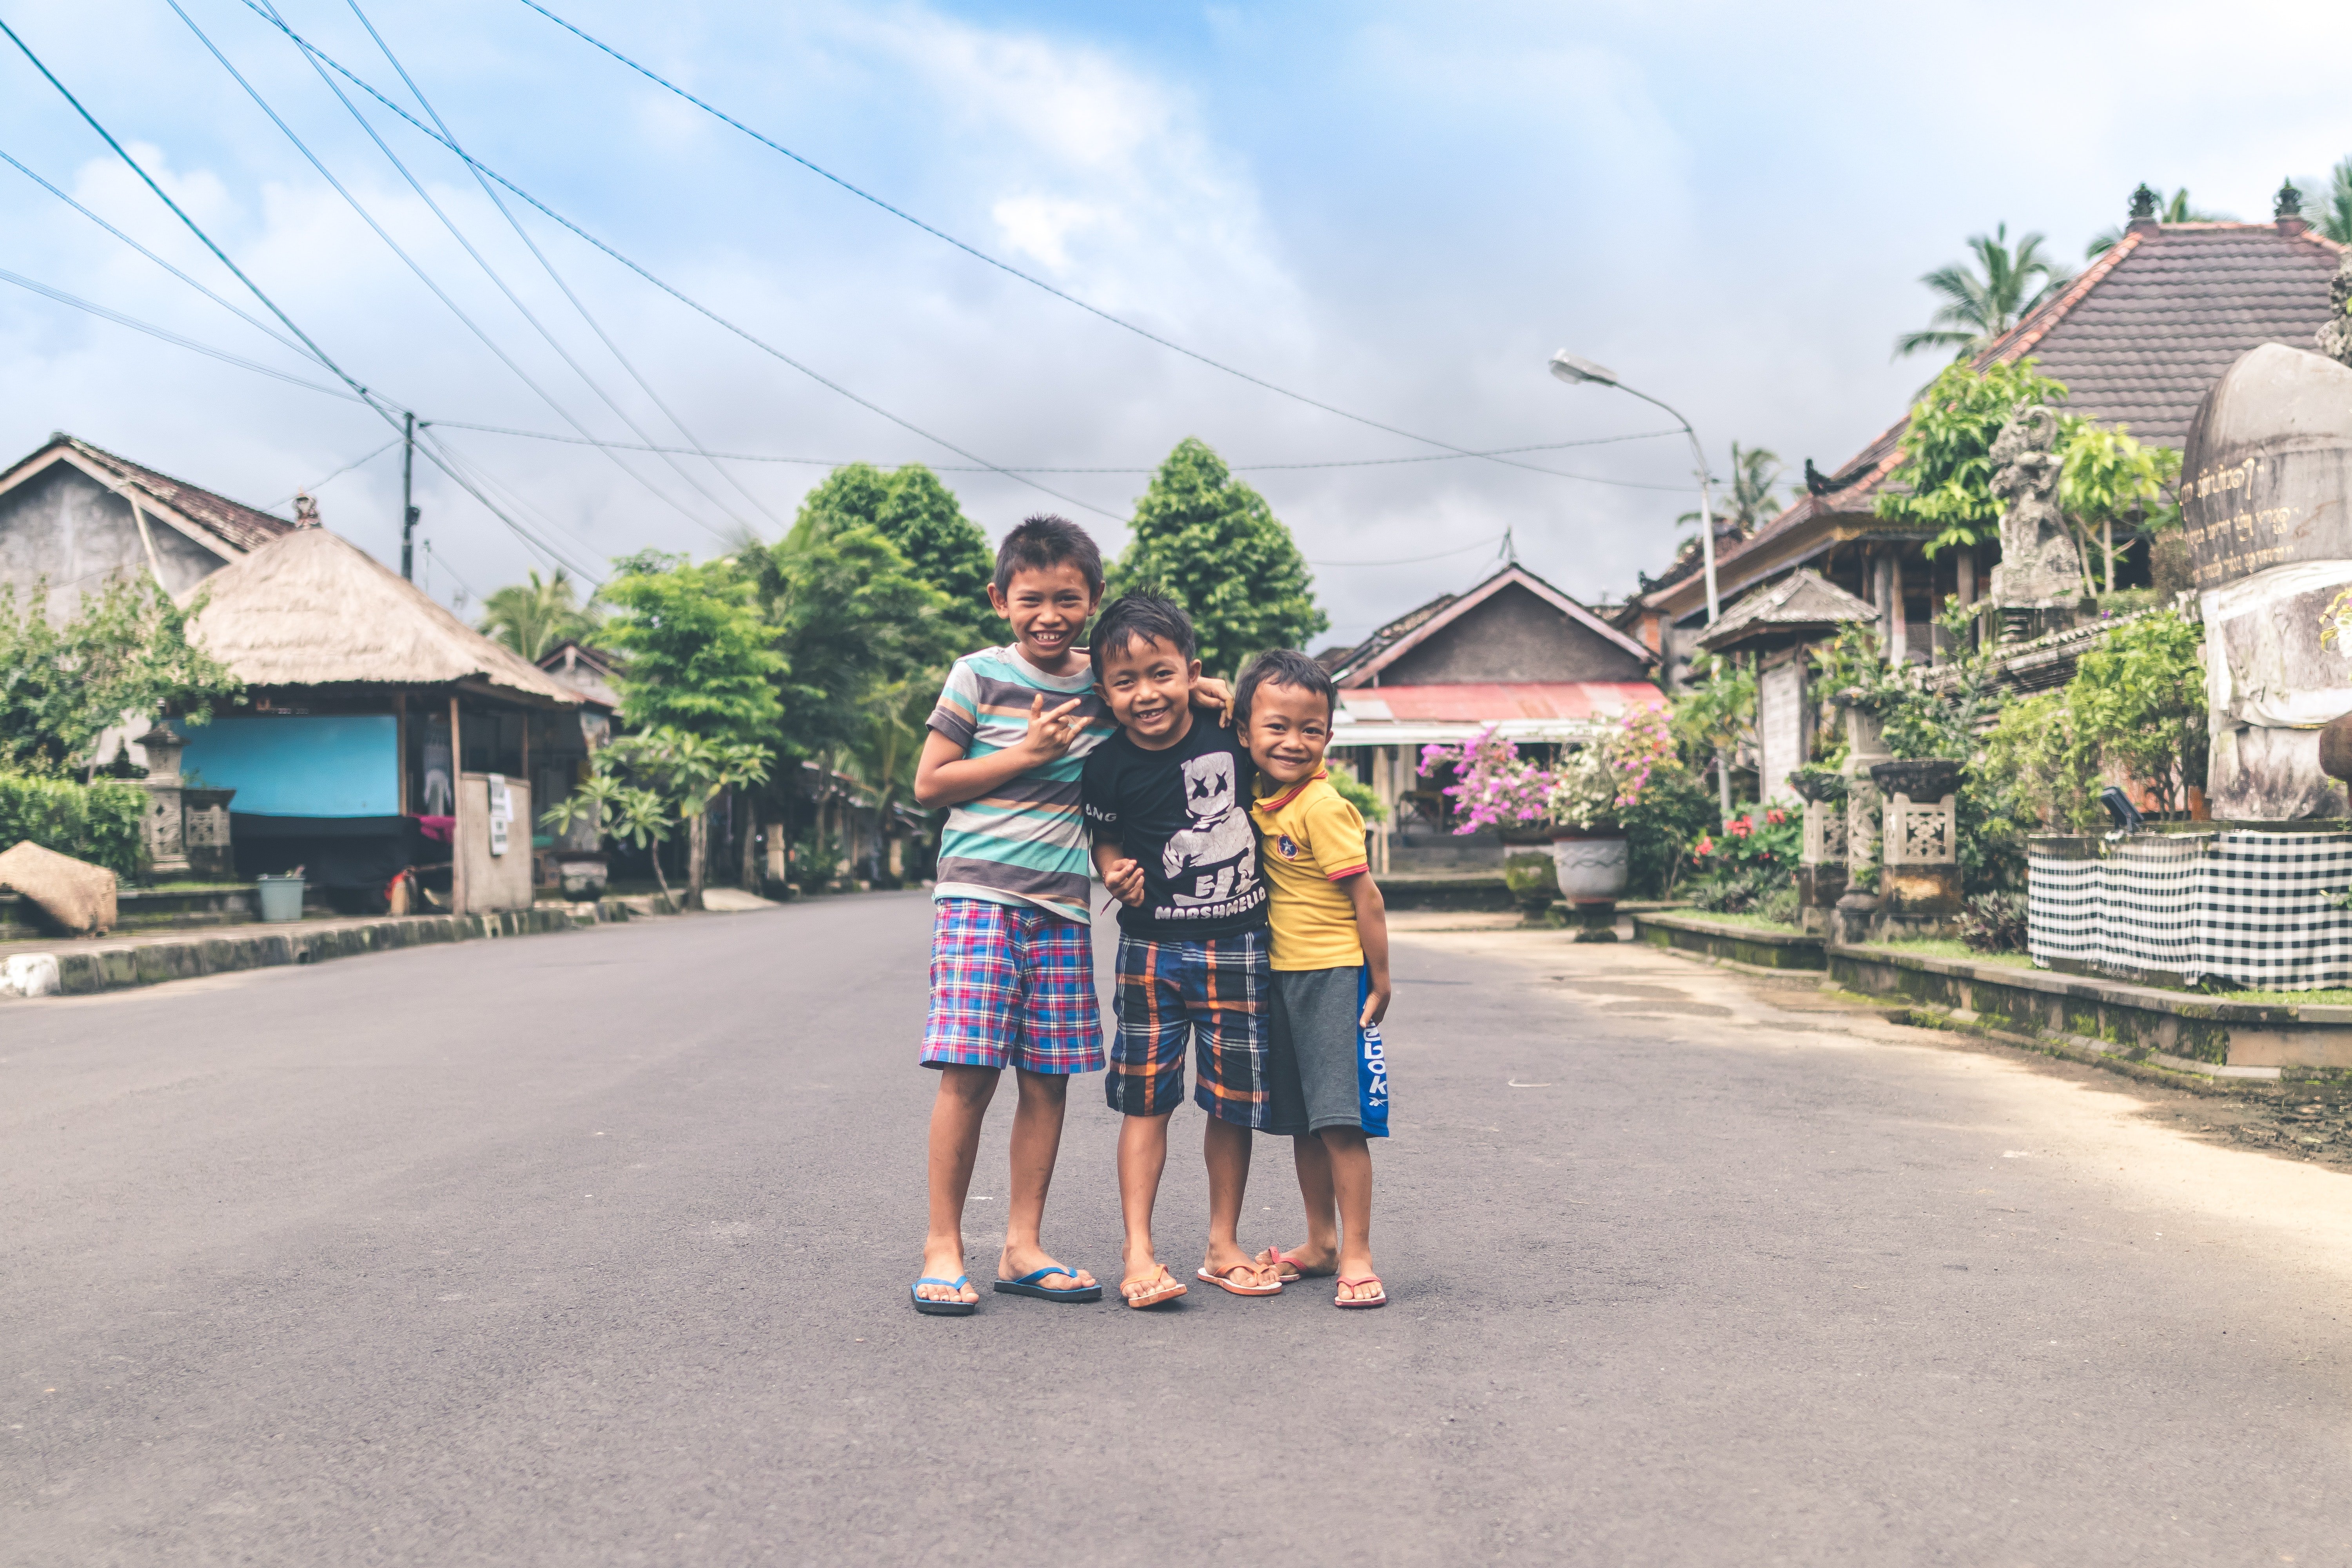 Pictured - Three young boys posing for a photo on the road | Source: Pexels 